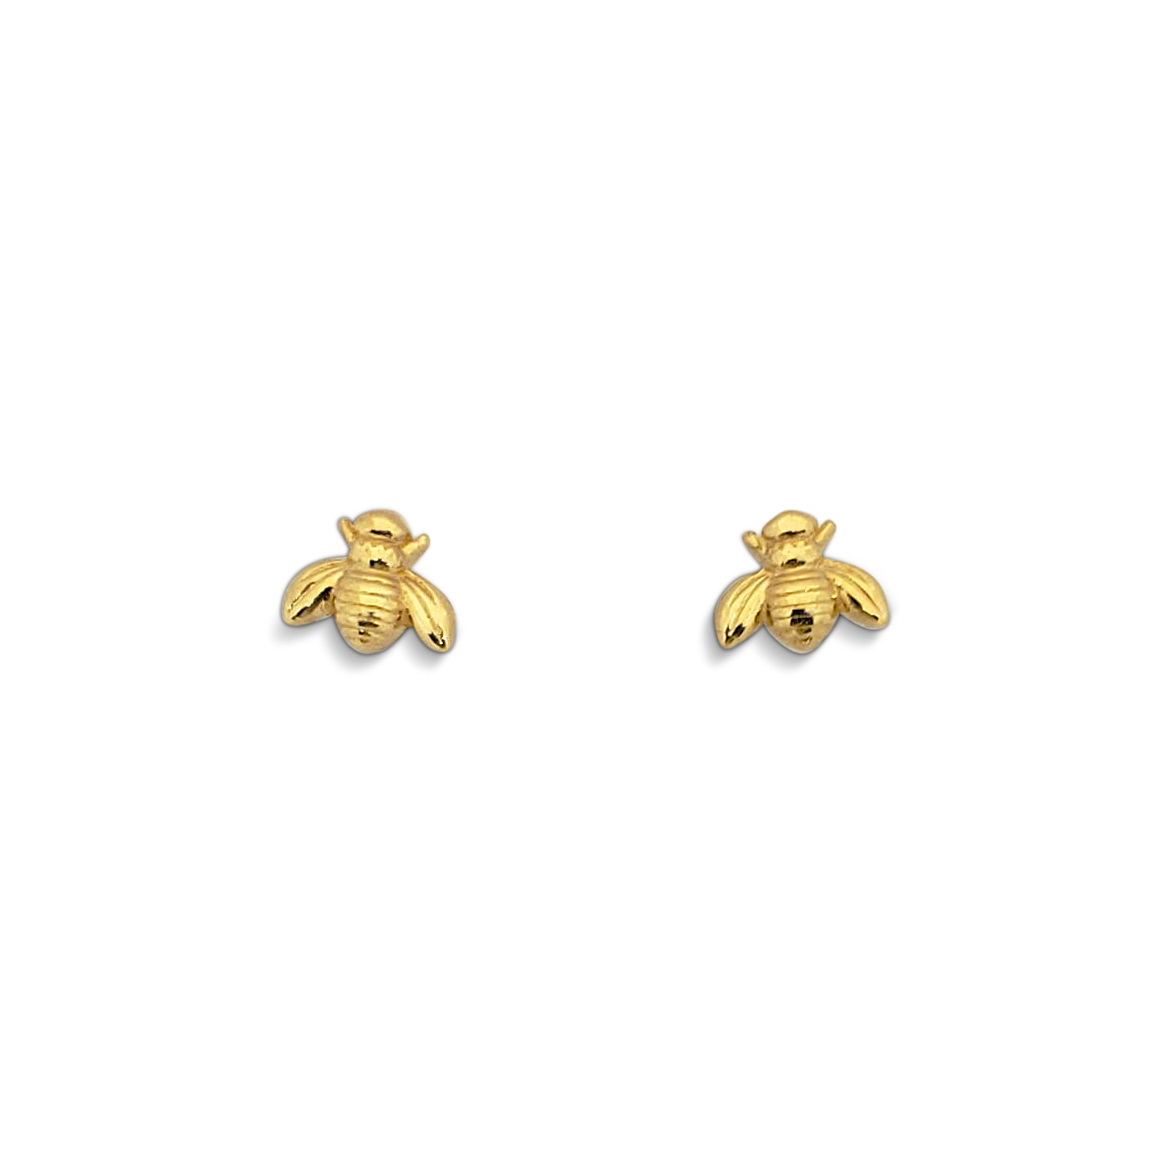 Solid 24K Yellow Gold Round Nugget Earrings | Gold Nugget Earrings